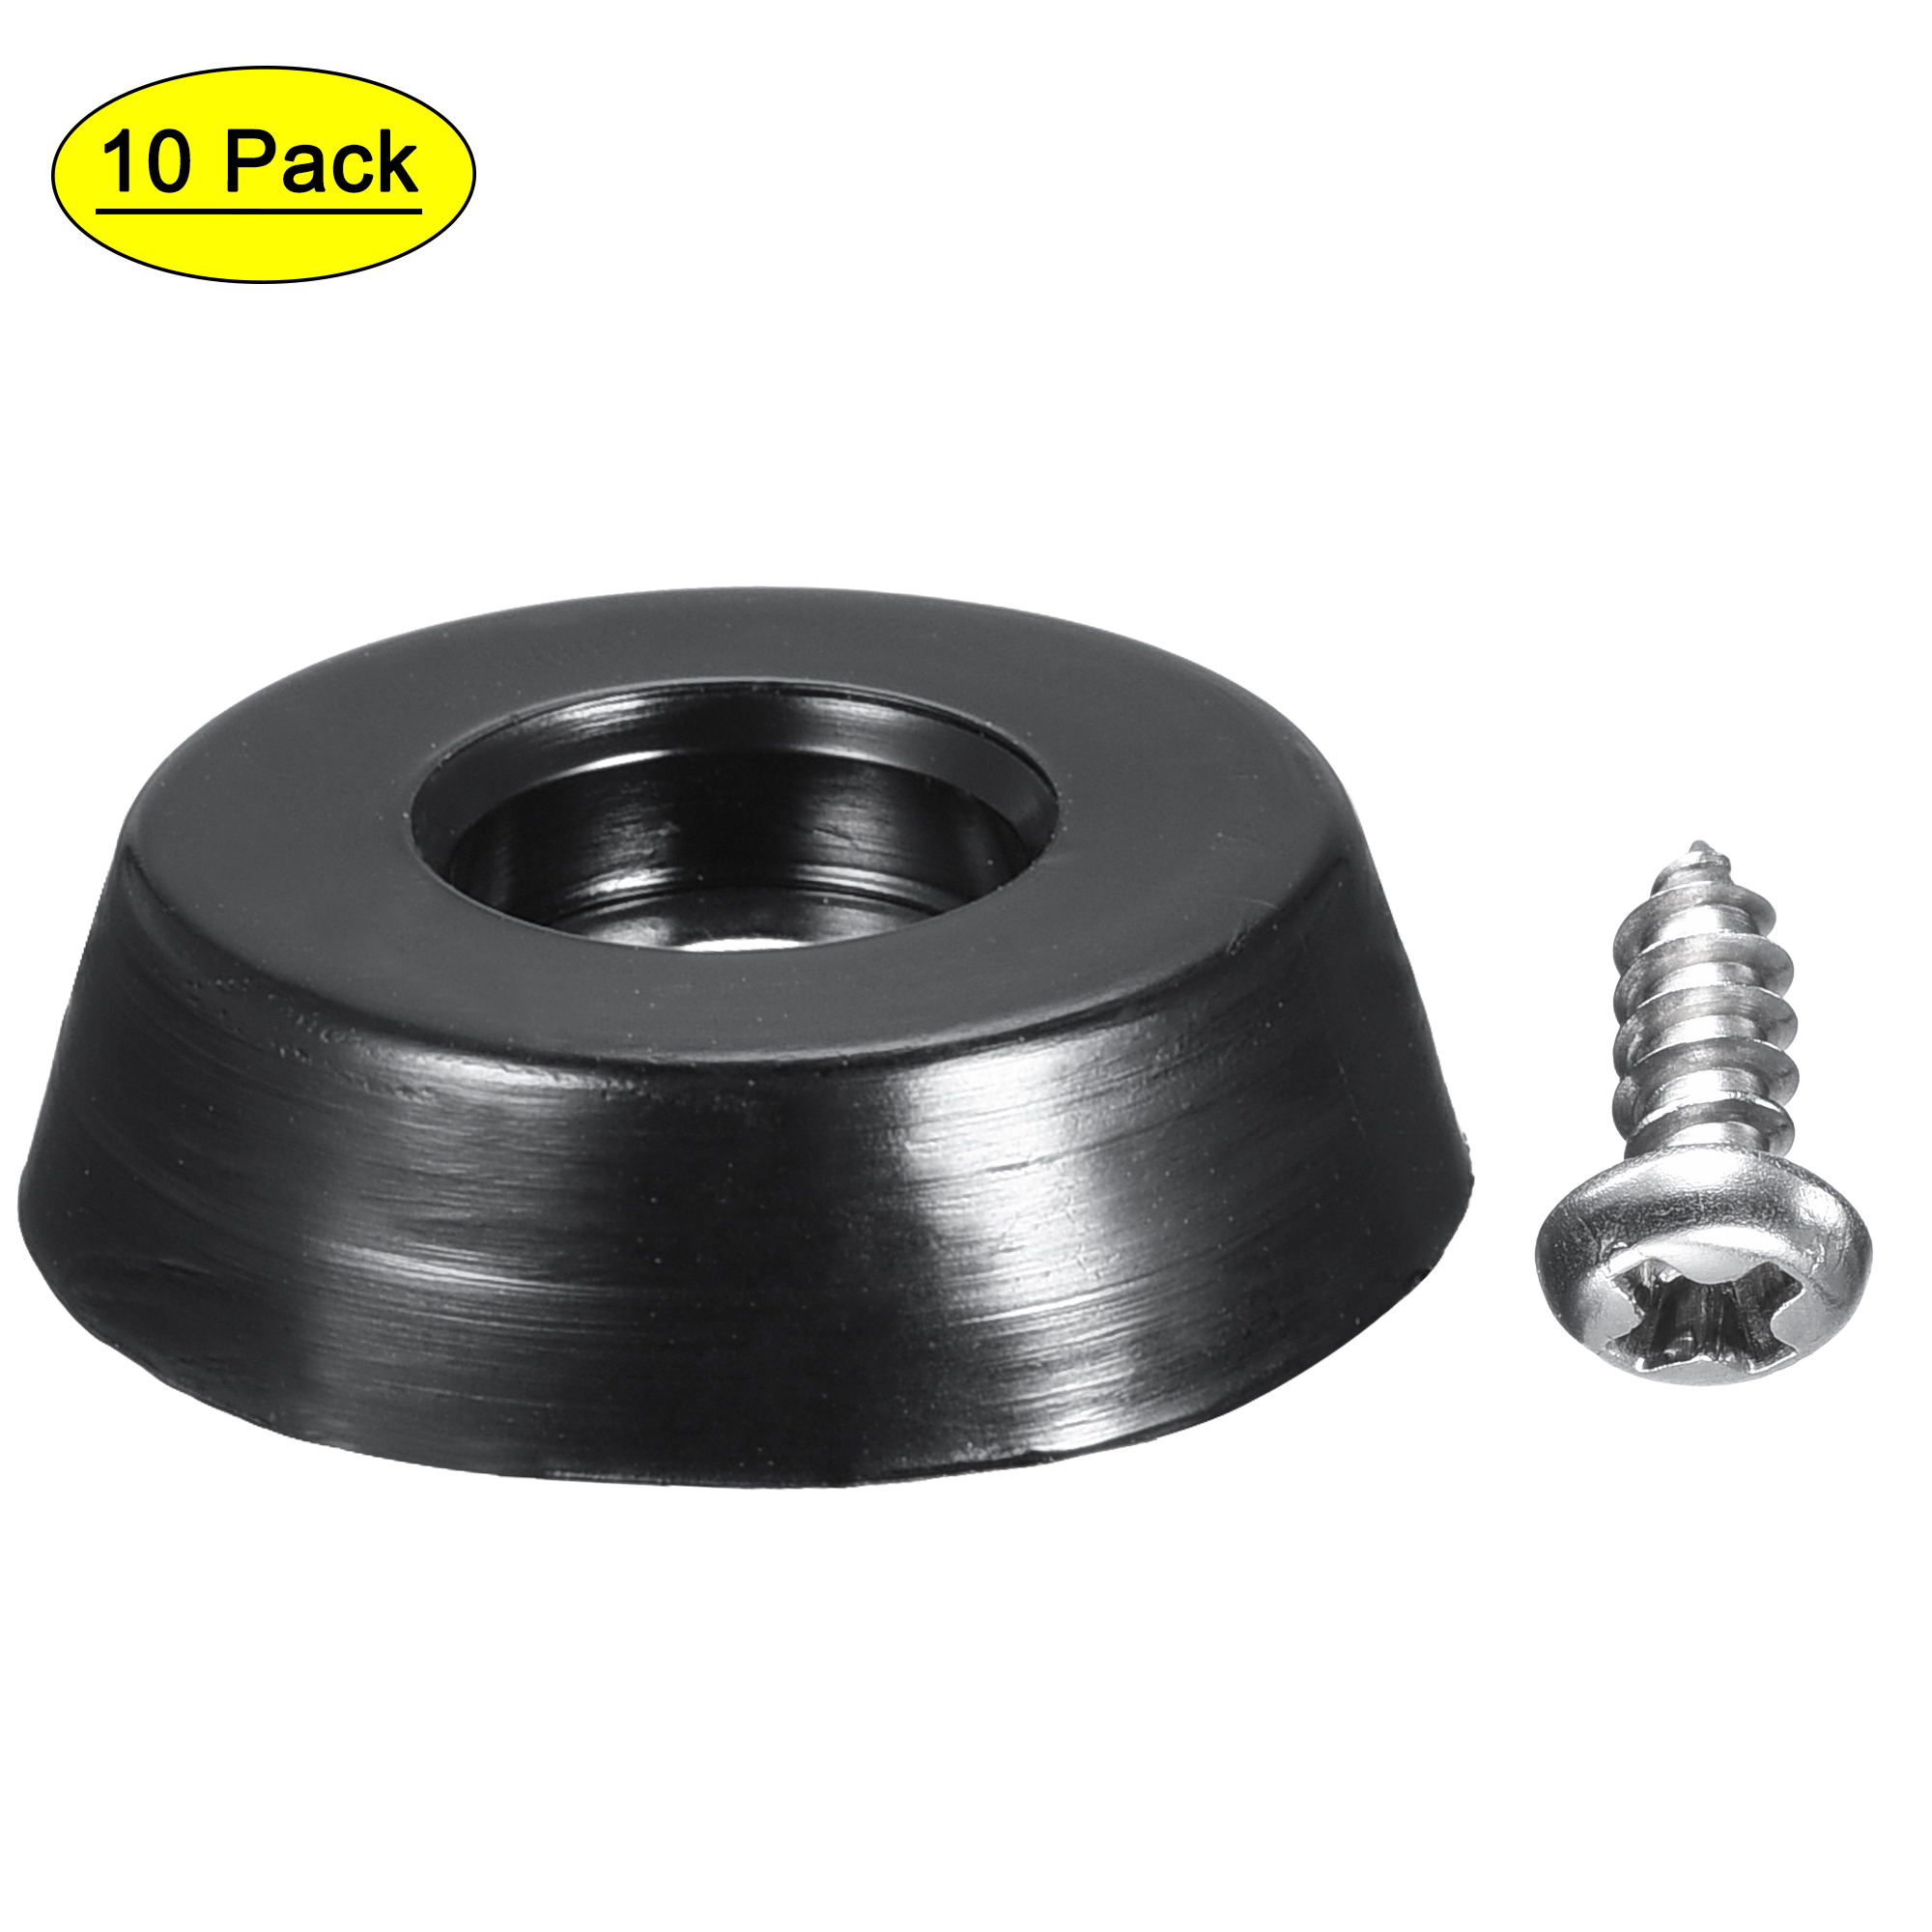 Uxcell 0.71" W x  0.2" H Rubber Bumper Feet, Stainless Steel Screws and Washer 10 Pack - image 1 of 5